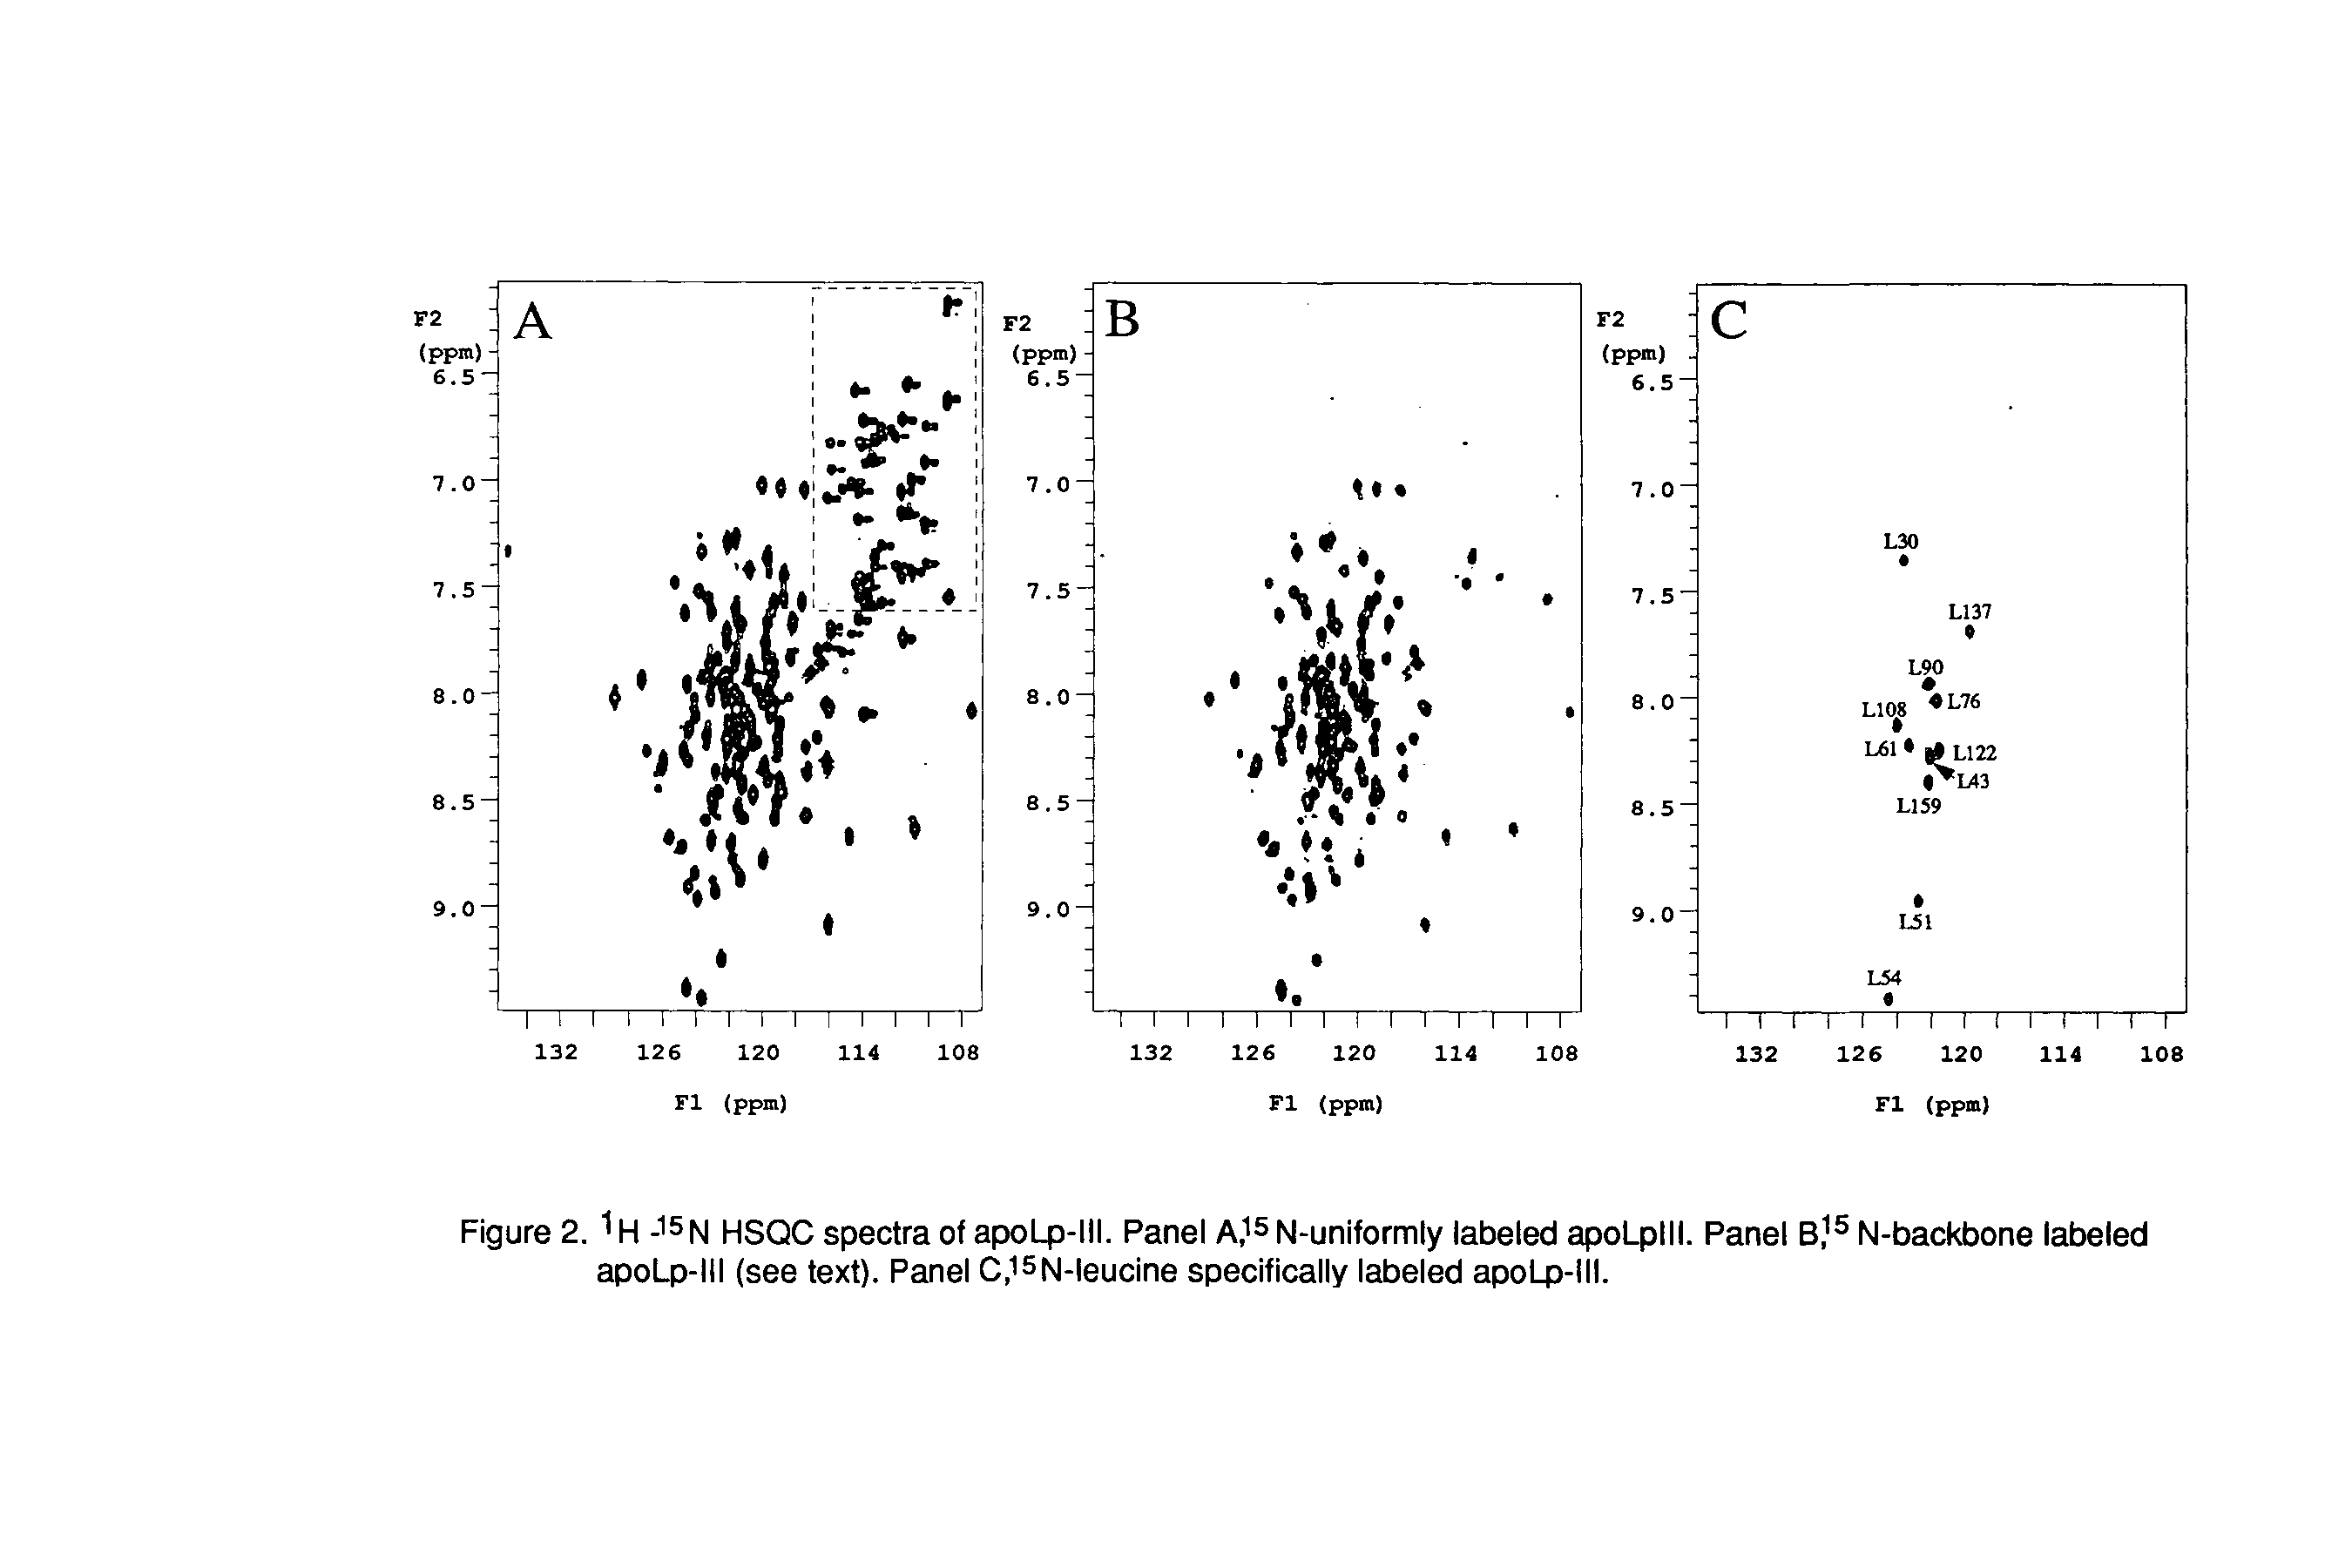 Figure 2. H hsqC spectra of apoLp-lll. Panel N-uniformly labeled apoLplll. Panel N-backbone labeled apoLp-lll (see text). Panel C,15N-Ieucine specifically labeled apoLp-lll.